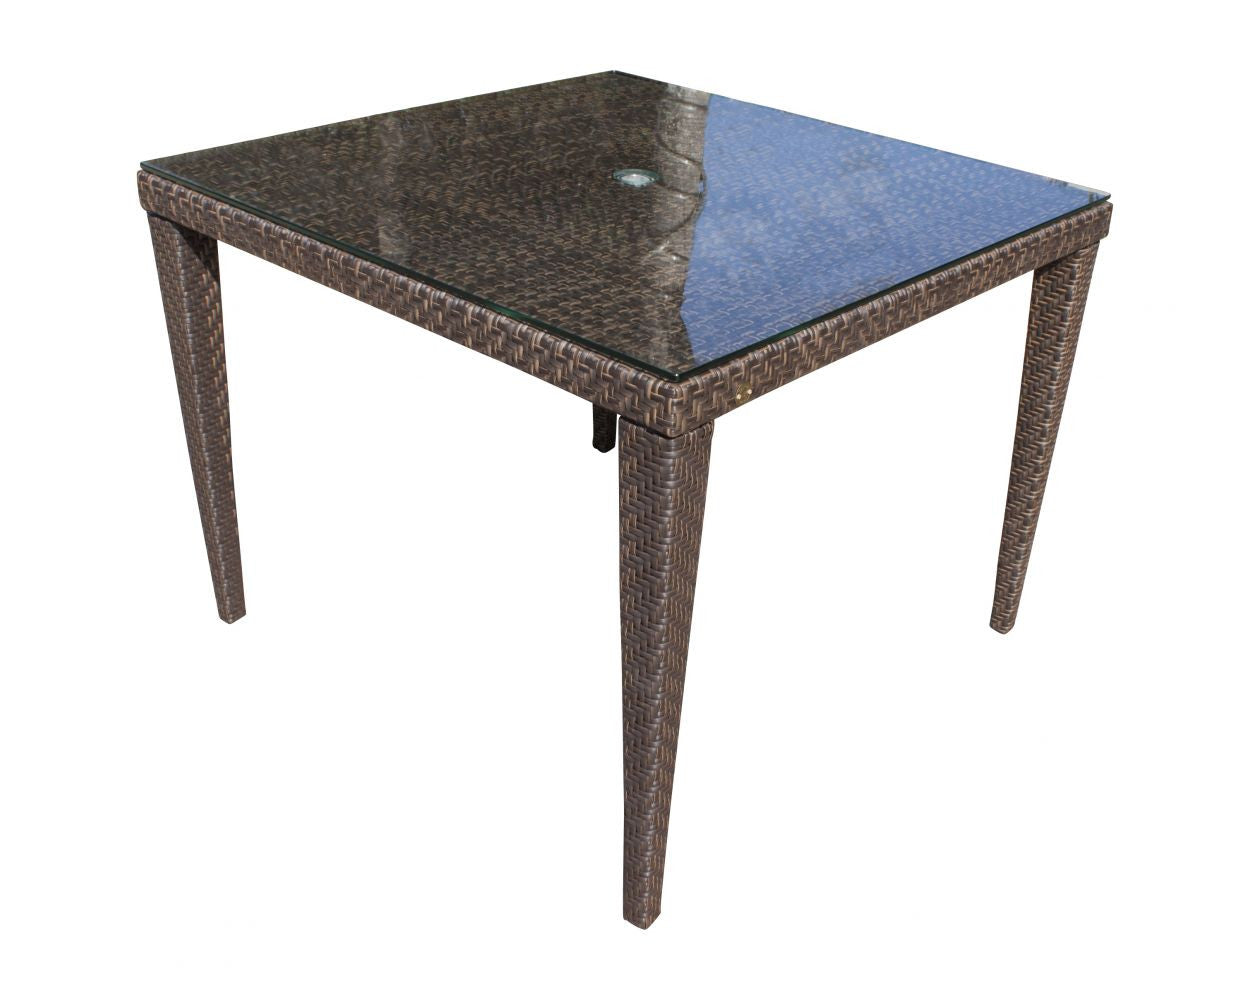 Hospitality Rattan Soho Woven Square 40" Dining Table with Glass